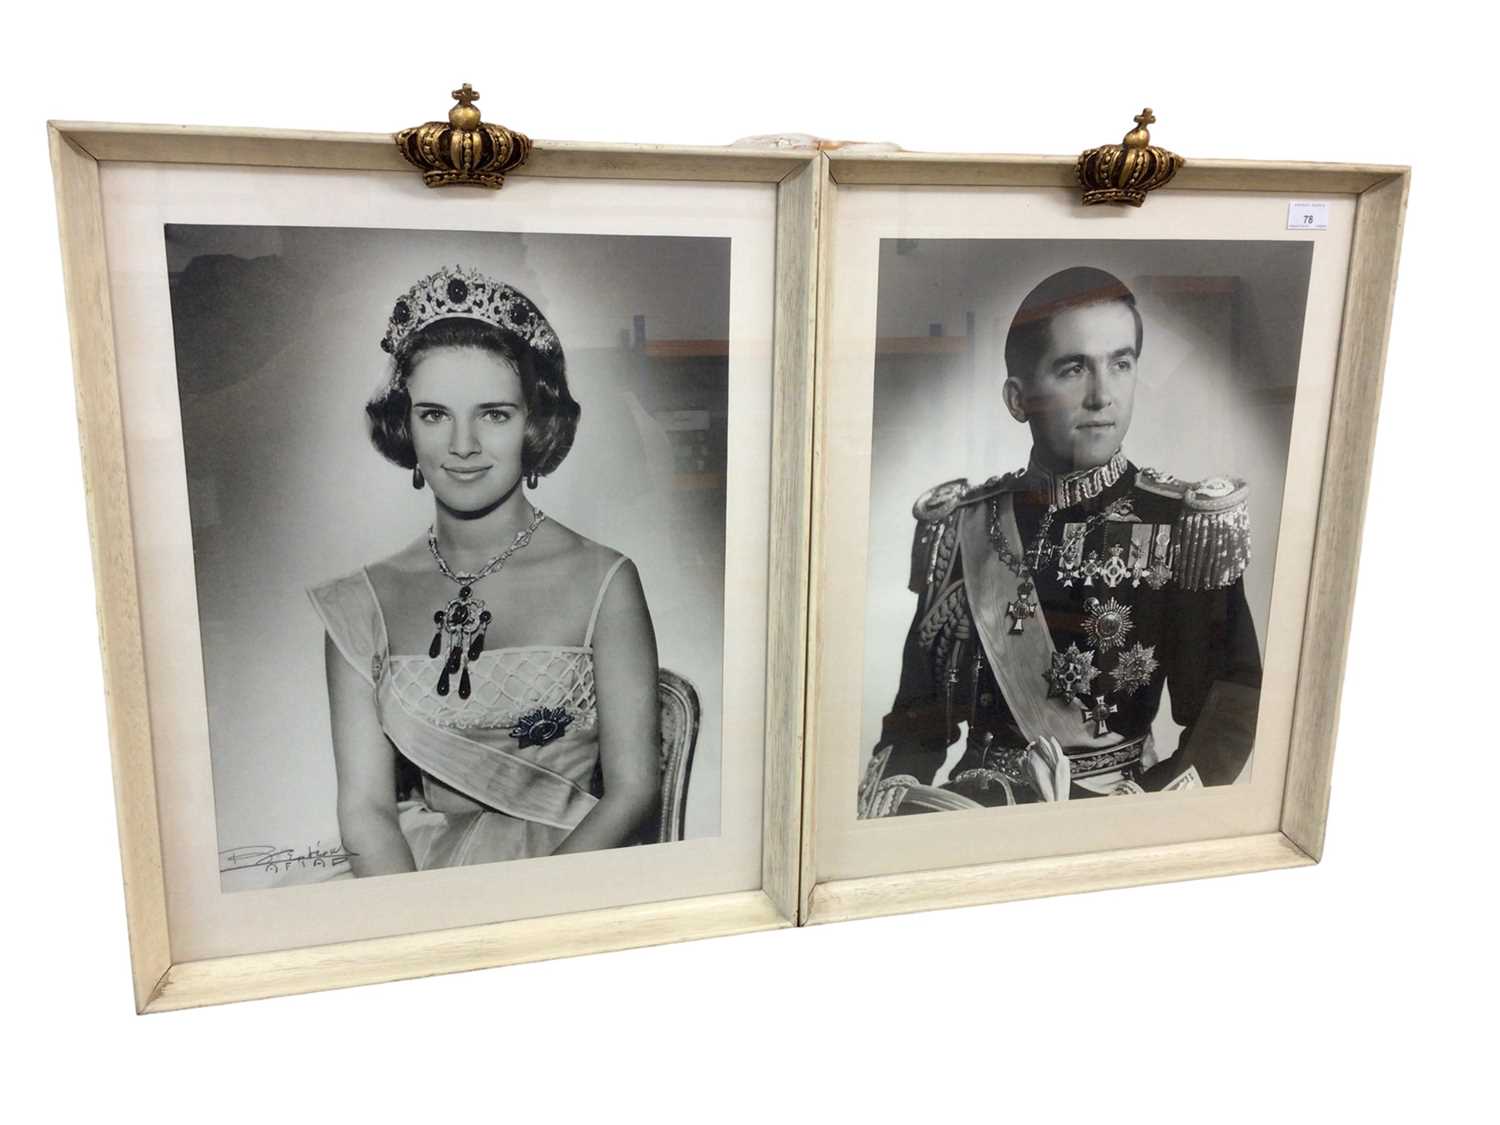 Lot 78 - T.R.H. King Constantine II of Greece and Queen Anne-Marie, pair fine 1960s Royal presentation portrait photographs of the King in uniform wearing Greek Orders and decorations, the Queen wearing a t...